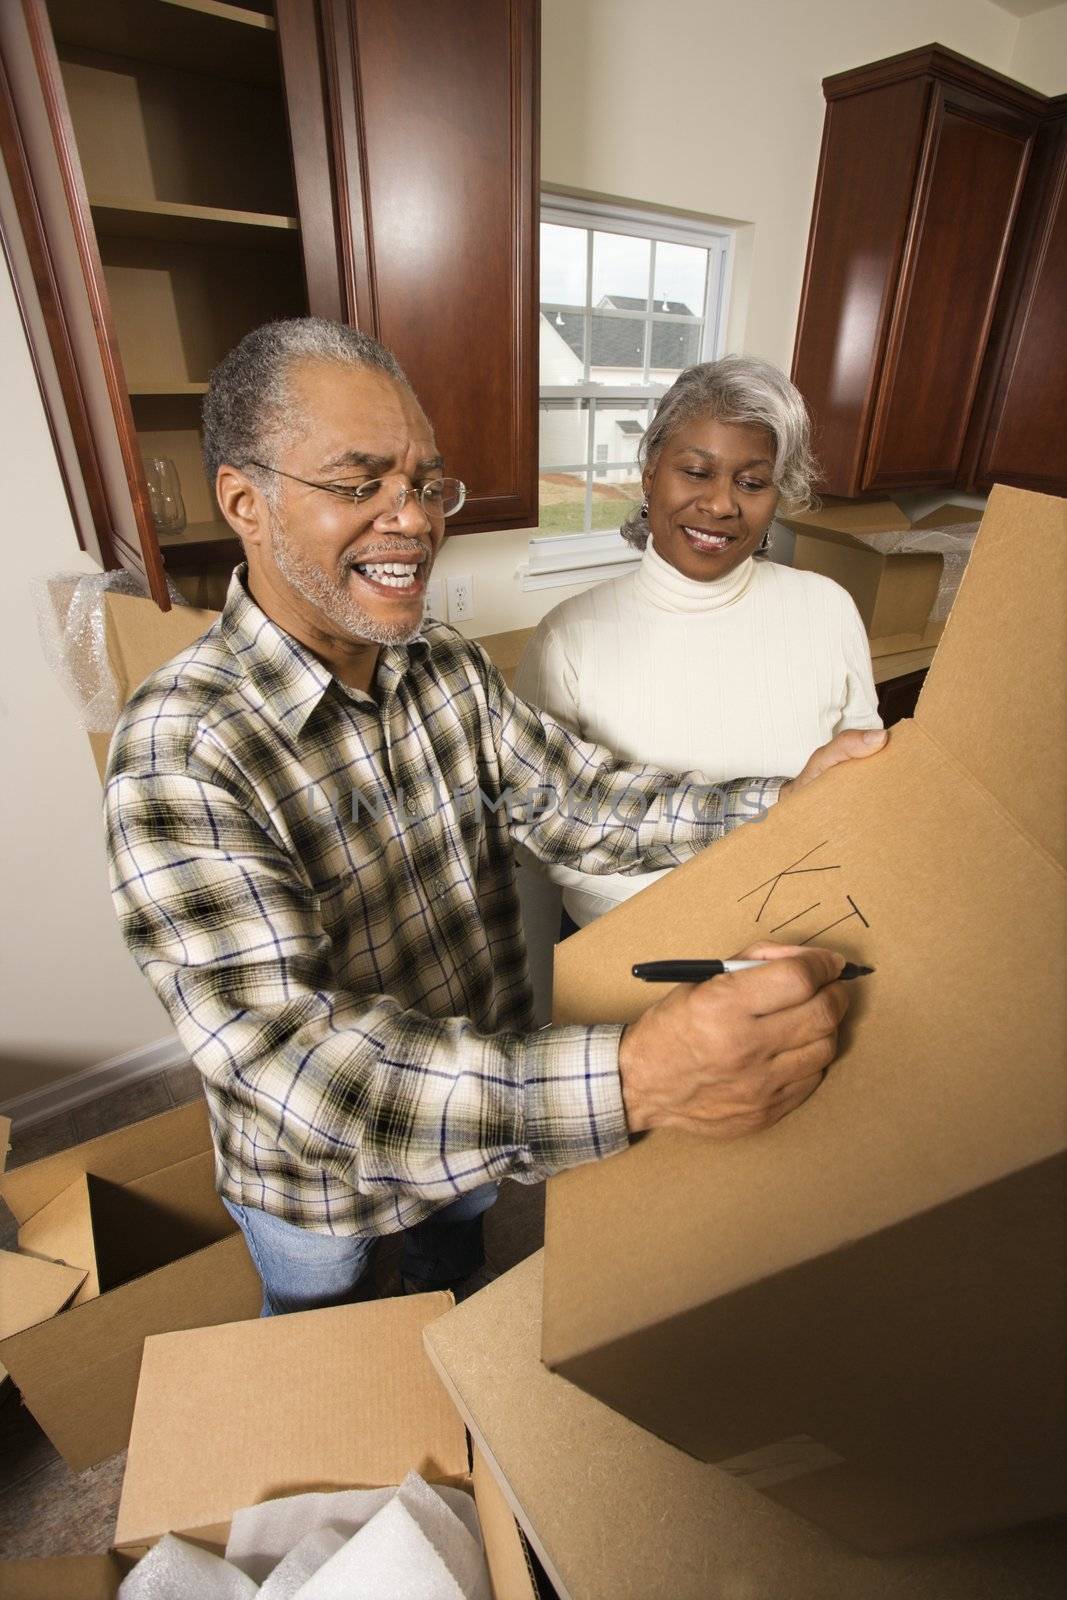 Middle-aged African-American male labeling moving box with wife in background.